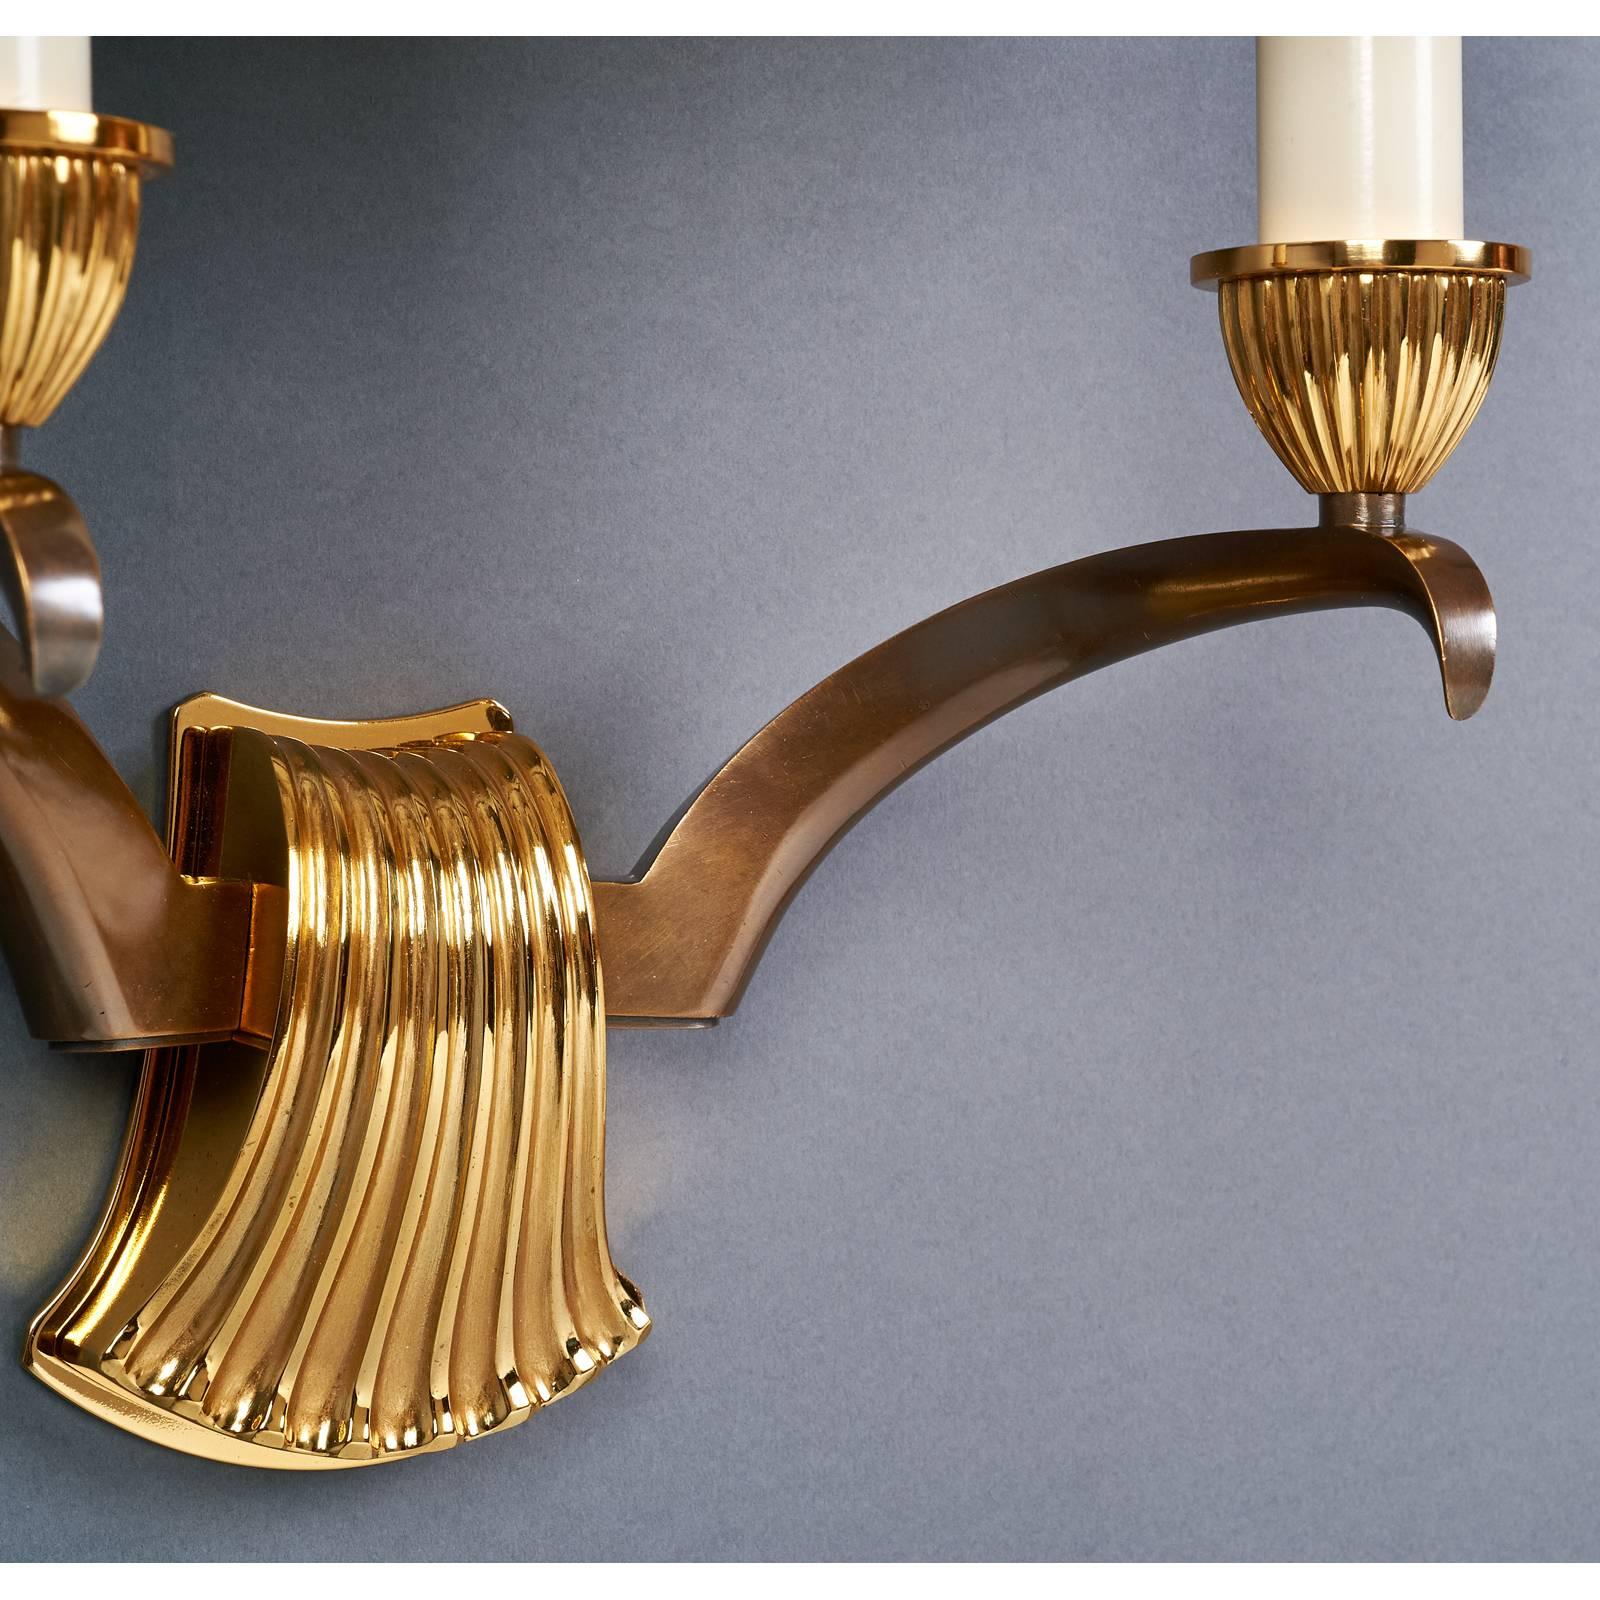 Genet Michon
A beautiful pair of two branch sconces with finely modeled scallop motif
and elegantly turned arms, in contrasting oxidized and gilt bronze.
France, 1950s
Dimensions: 13.5 W x 8 D x 18 H
Rewired for use in the USA with chandelier base